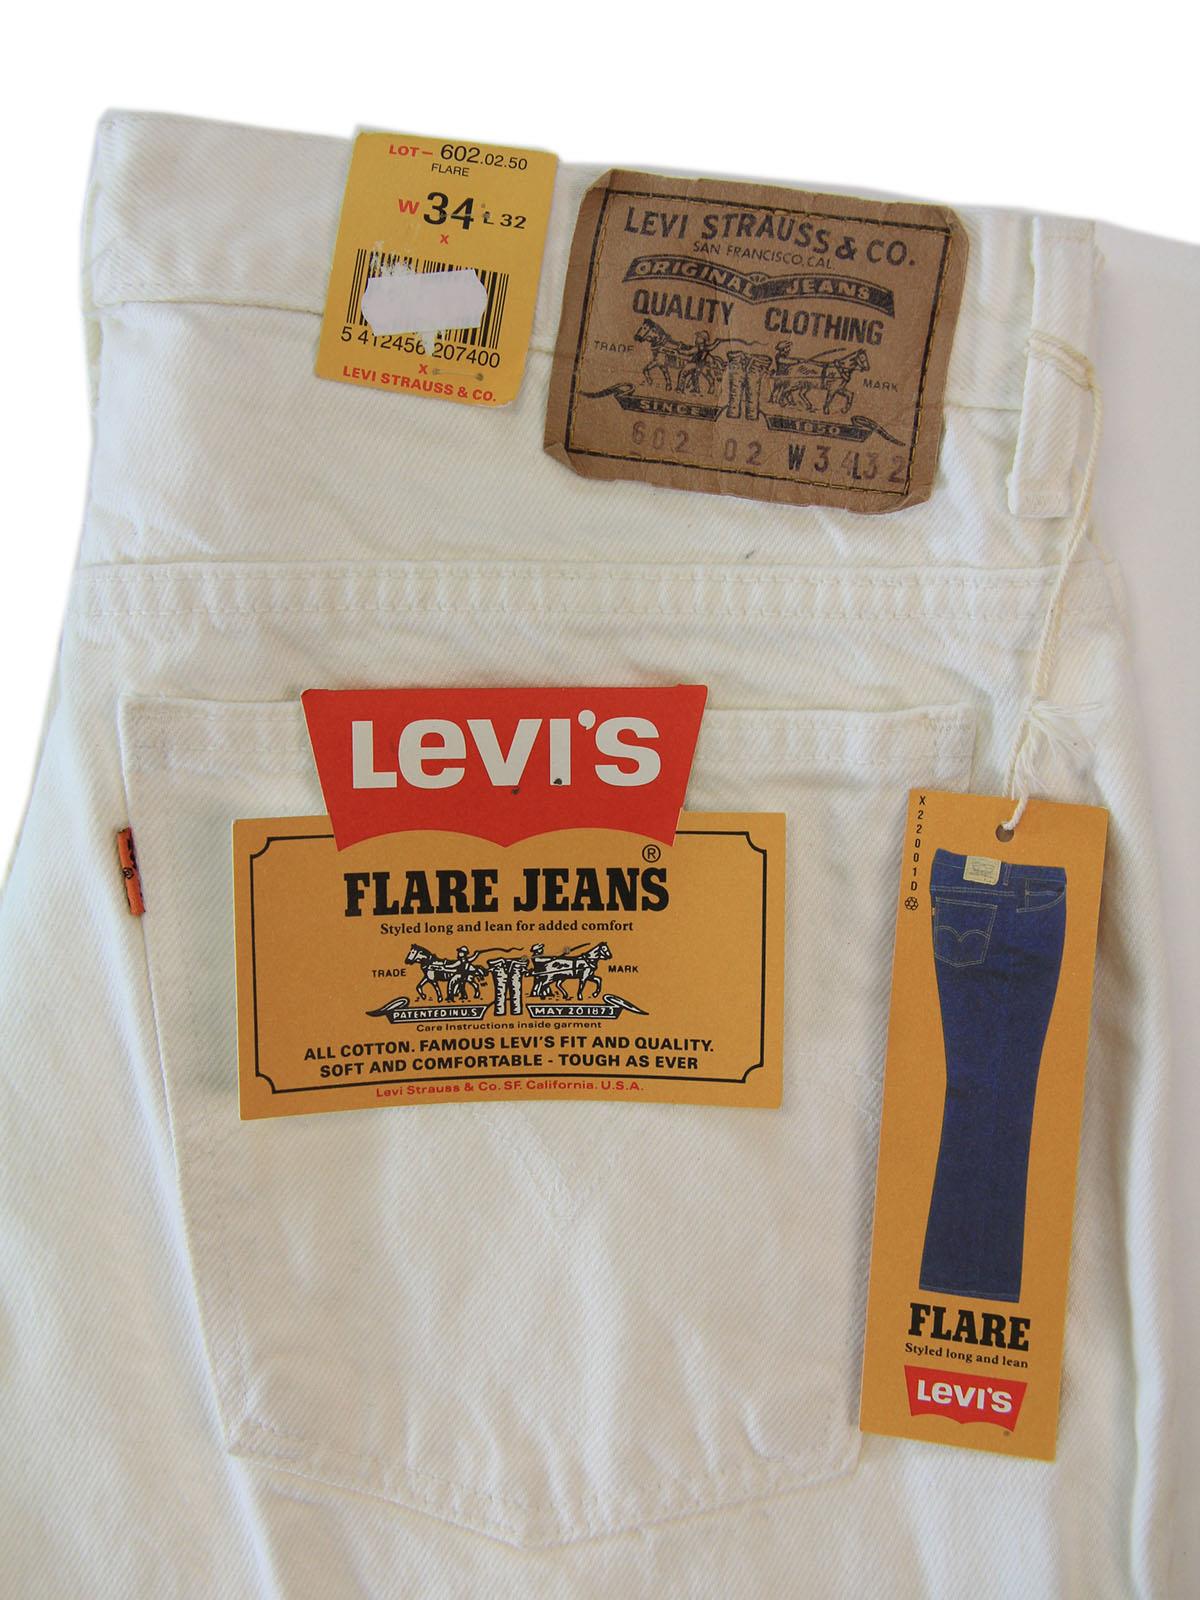 LEVI'S 602 Flare Jeans